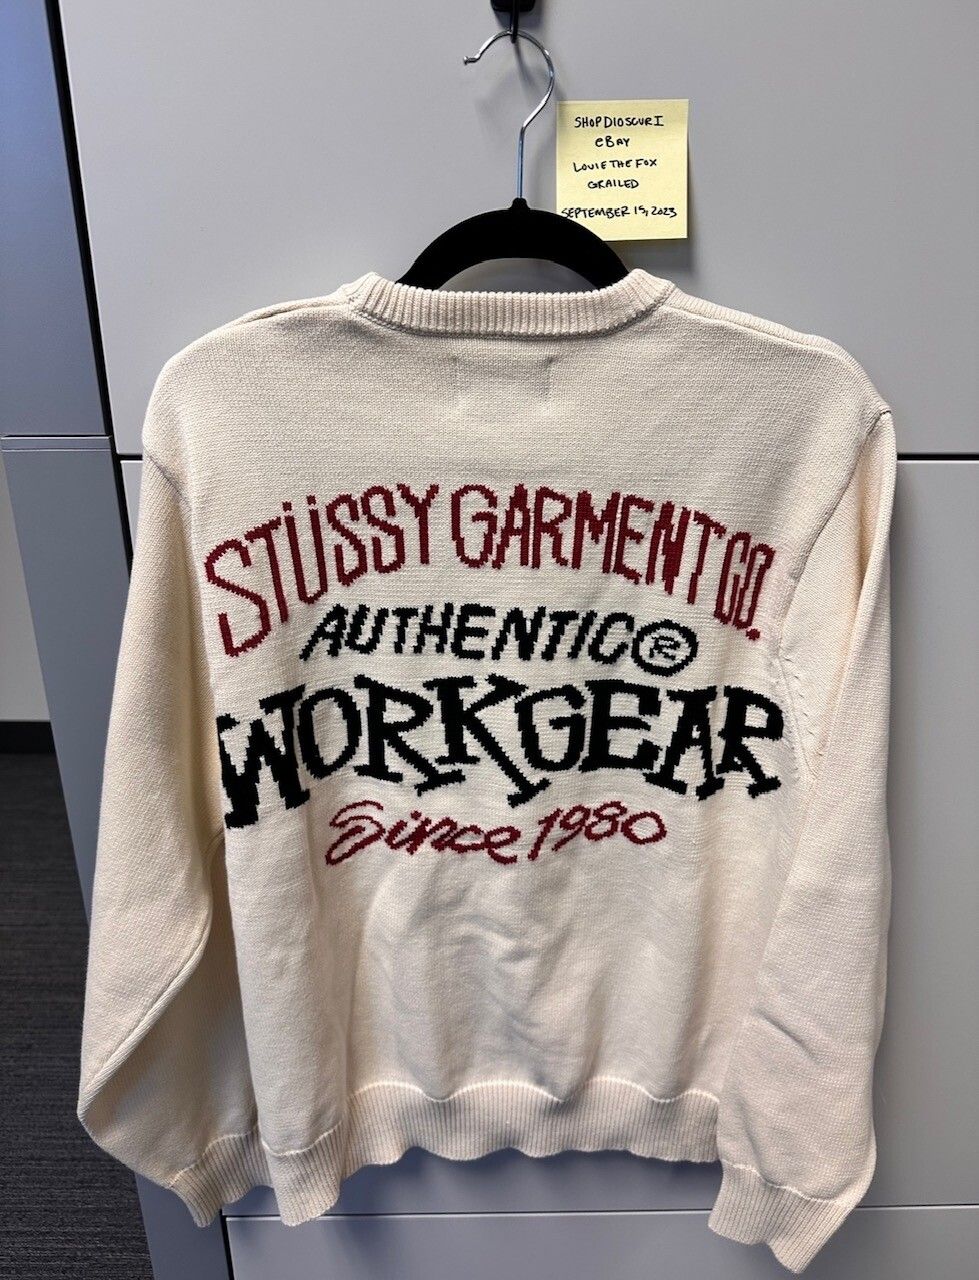 Stussy Stussy Authentic Workgear Sweater Natural Medium   Grailed